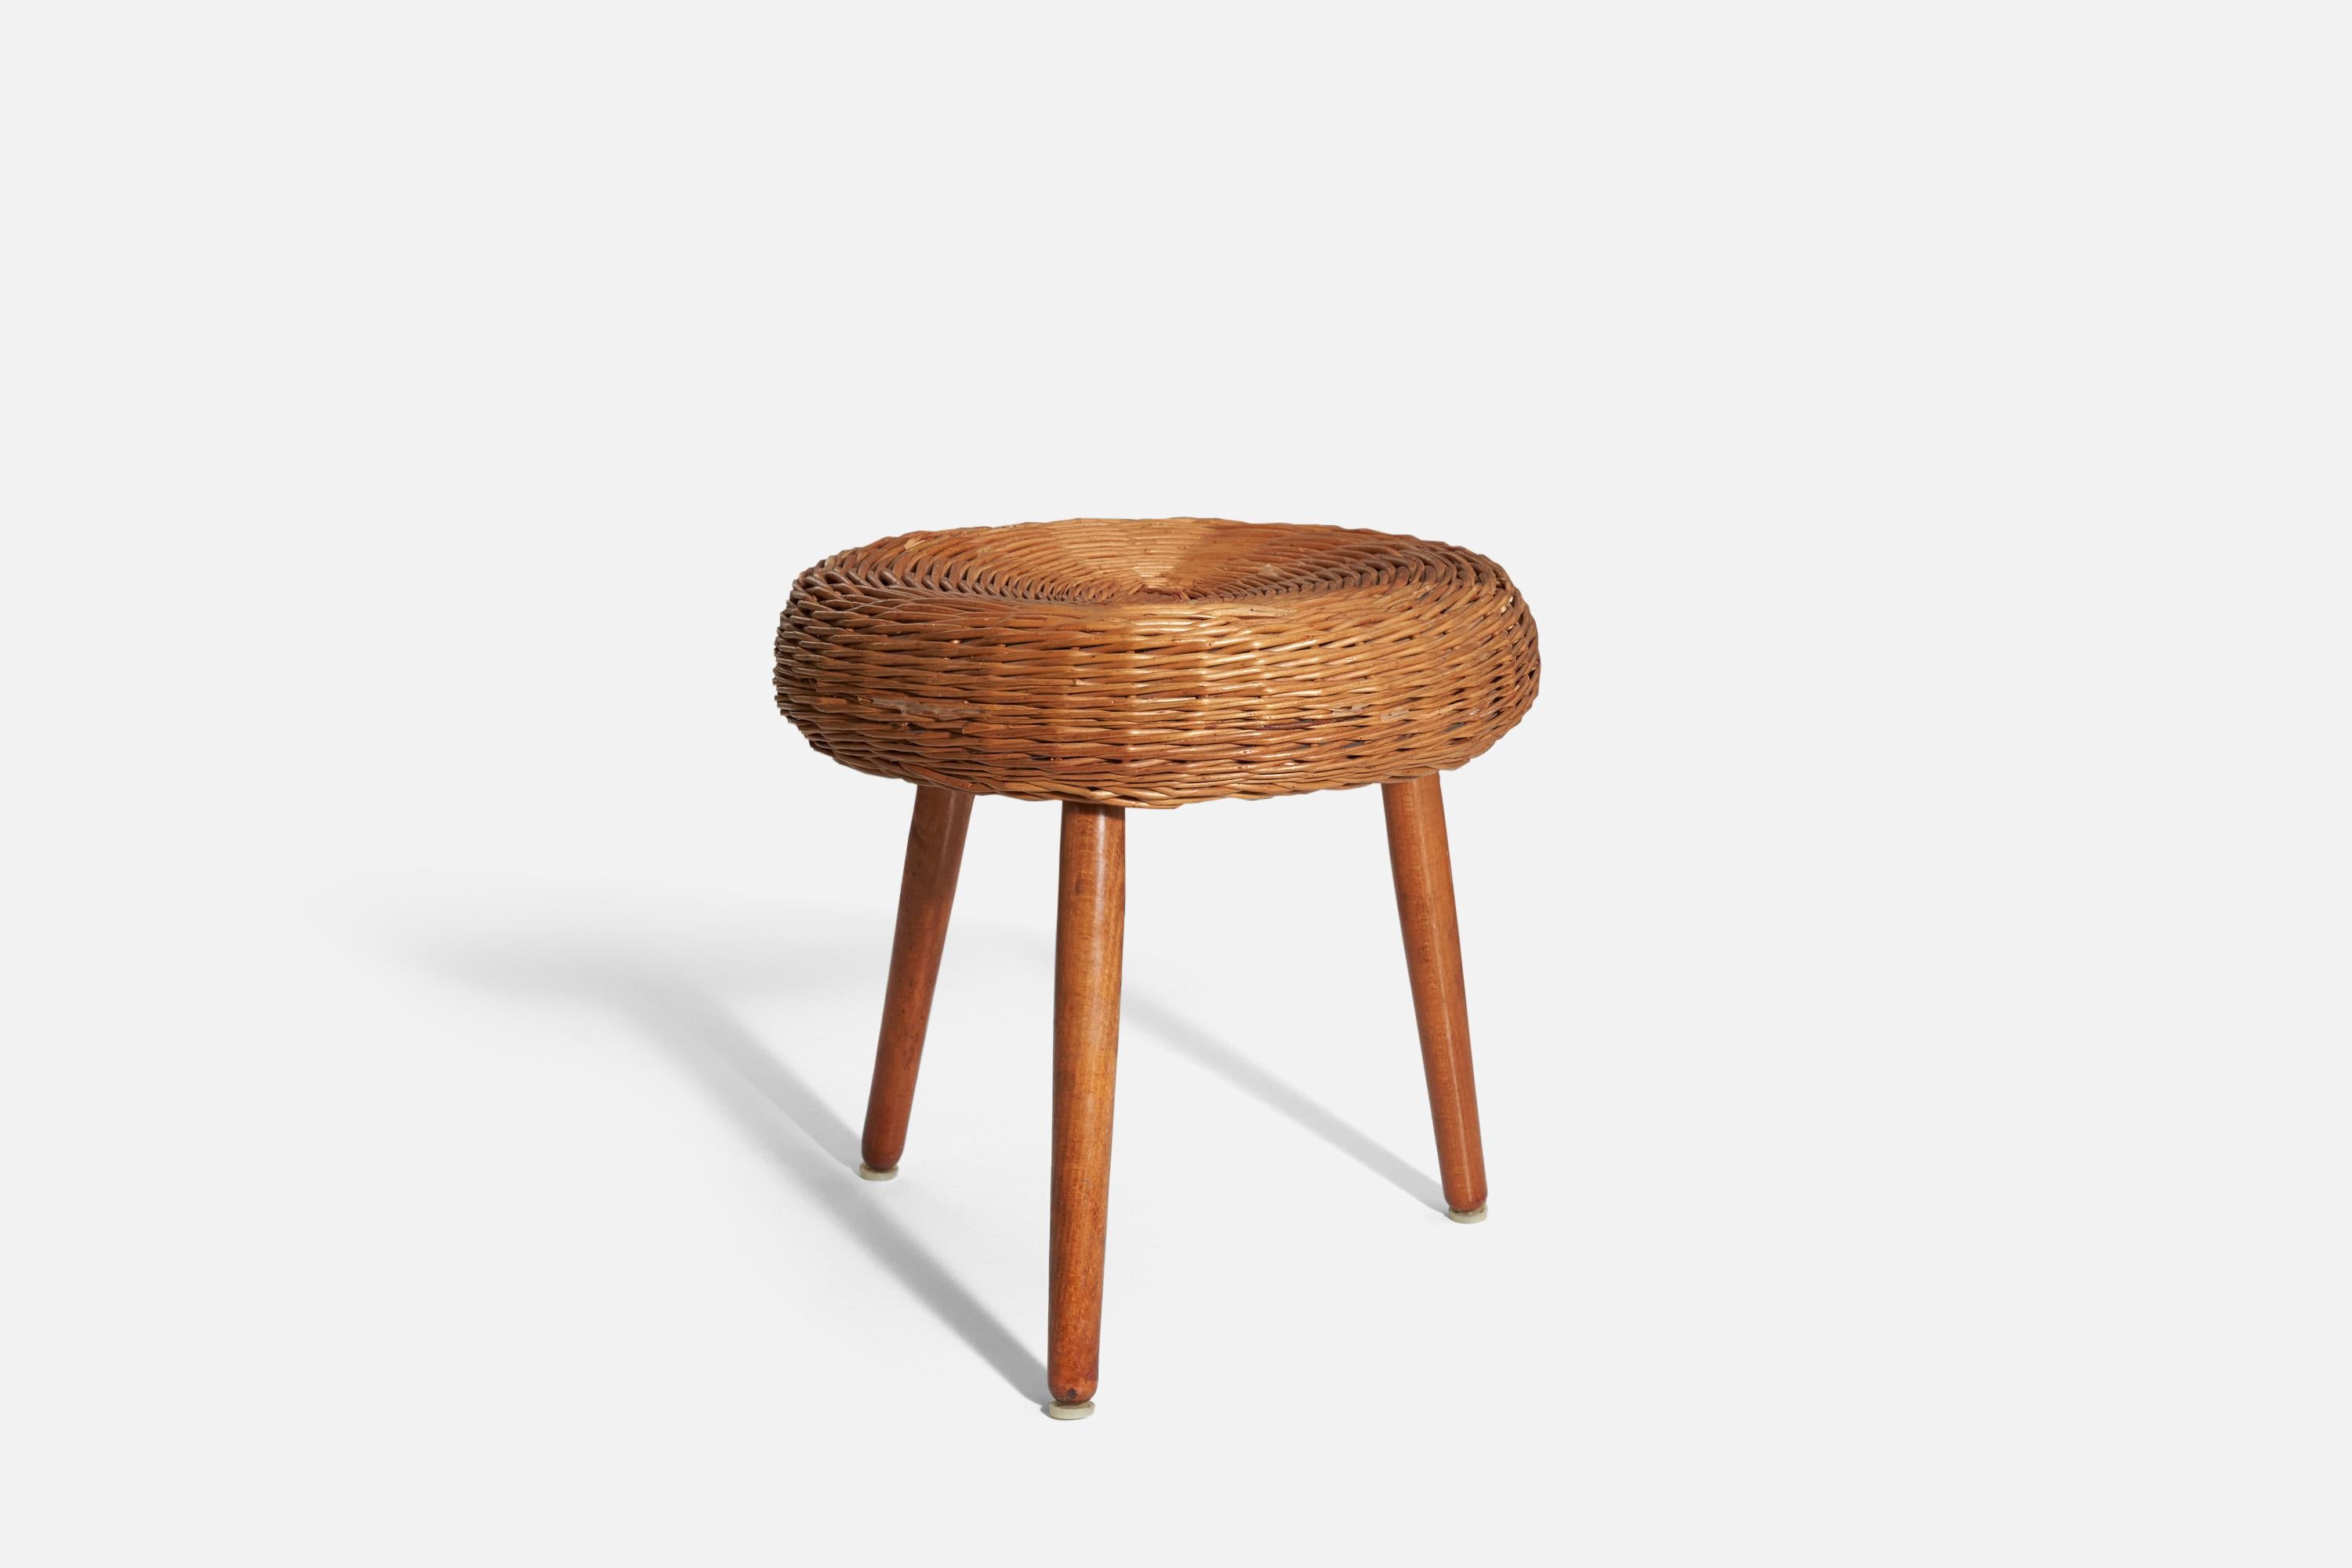 A wicker stool attributed to Tony Paul, United States, 1950s.
   